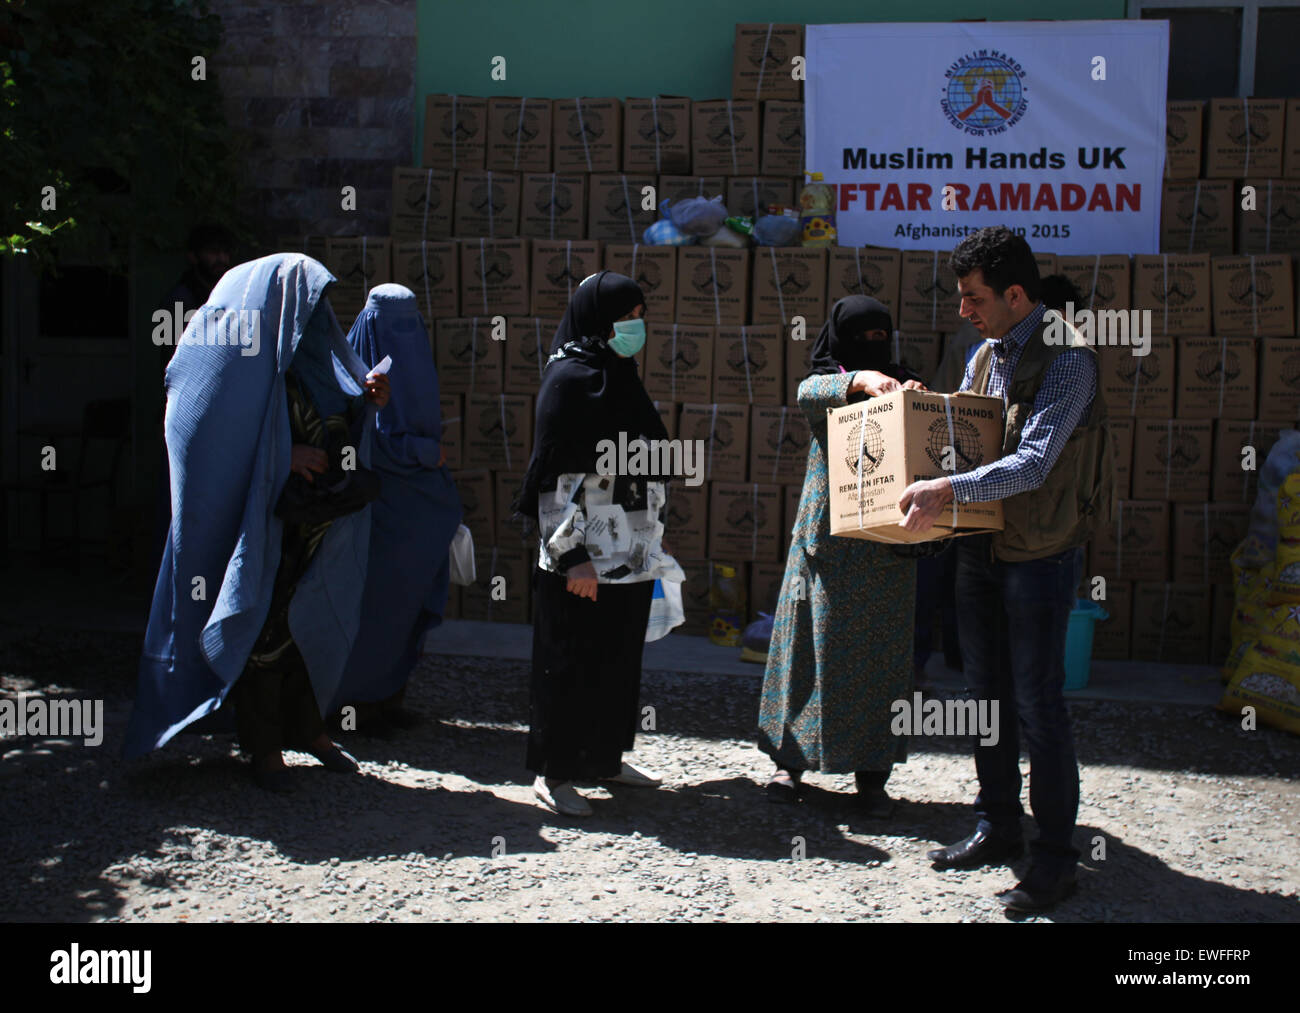 (150625) -- KABUL, June 25, 2015 (Xinhua) -- Afghan women receive food donated by Muslim Hands International organization for poor people during the holy month of Ramadan in Kabul, Afghanistan, June 25, 2015. (Xinhua/Ahmad Massoud) Stock Photo